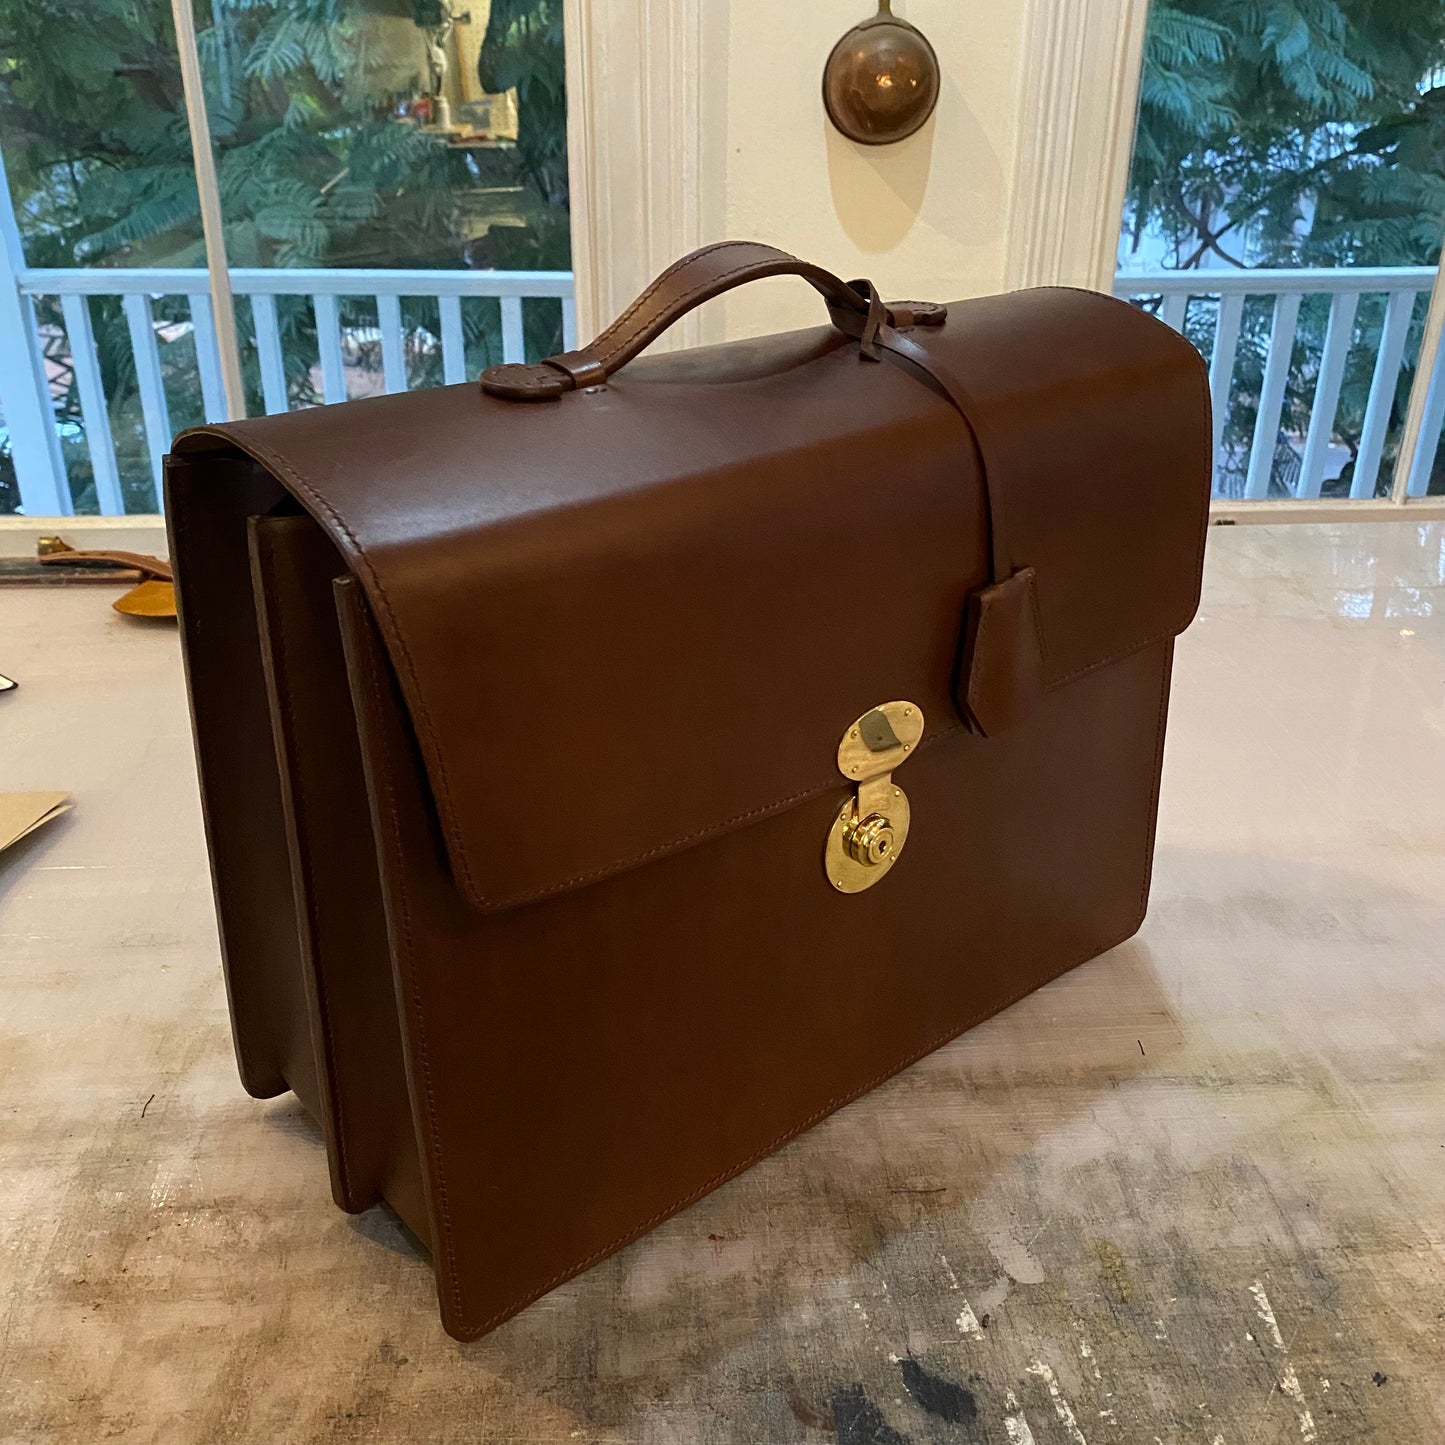 Bag Makers / Advanced Leather Craft Class